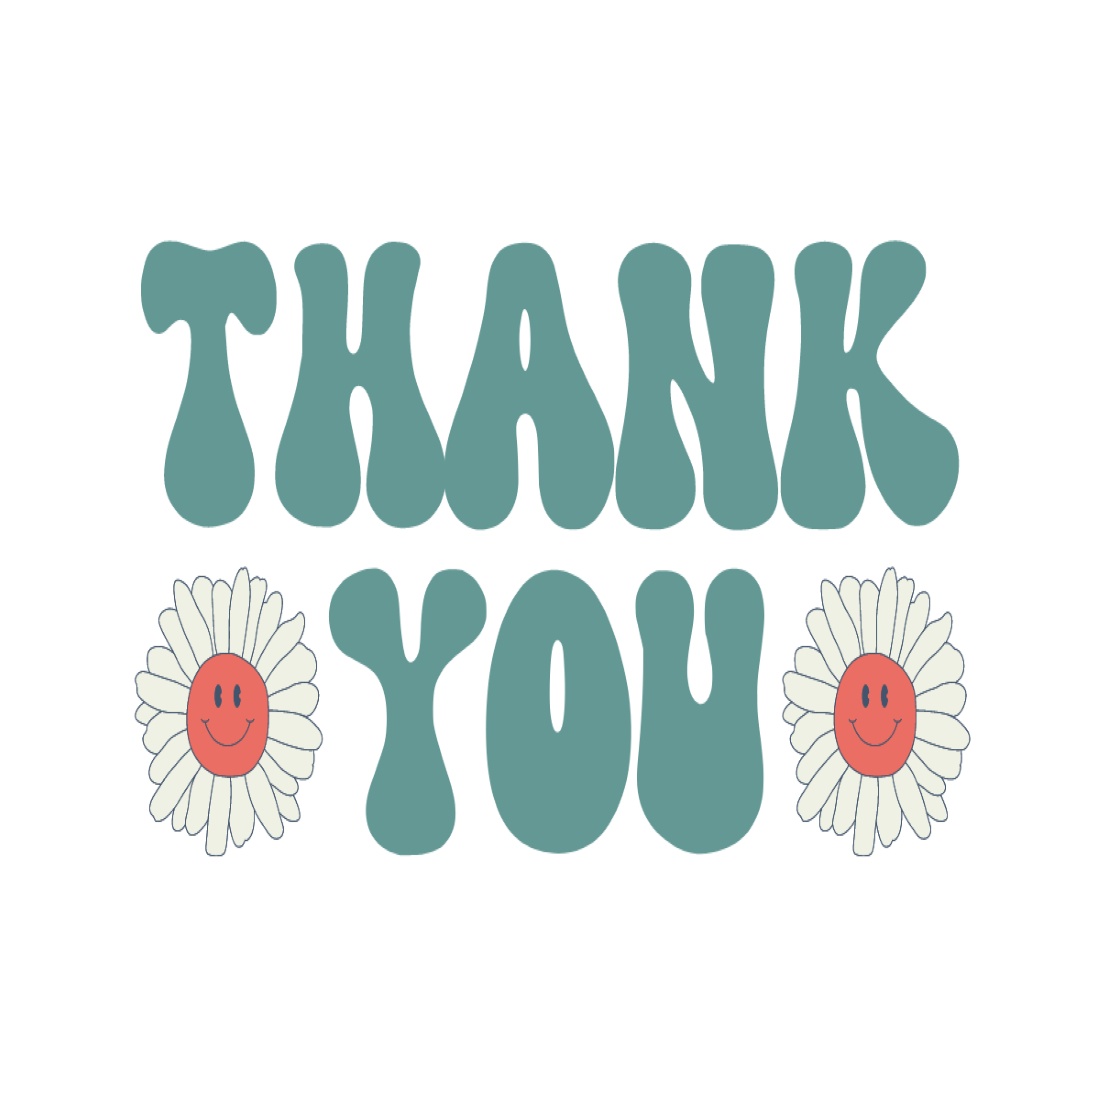 09 preview magic night retro groovy font thank you custom 667